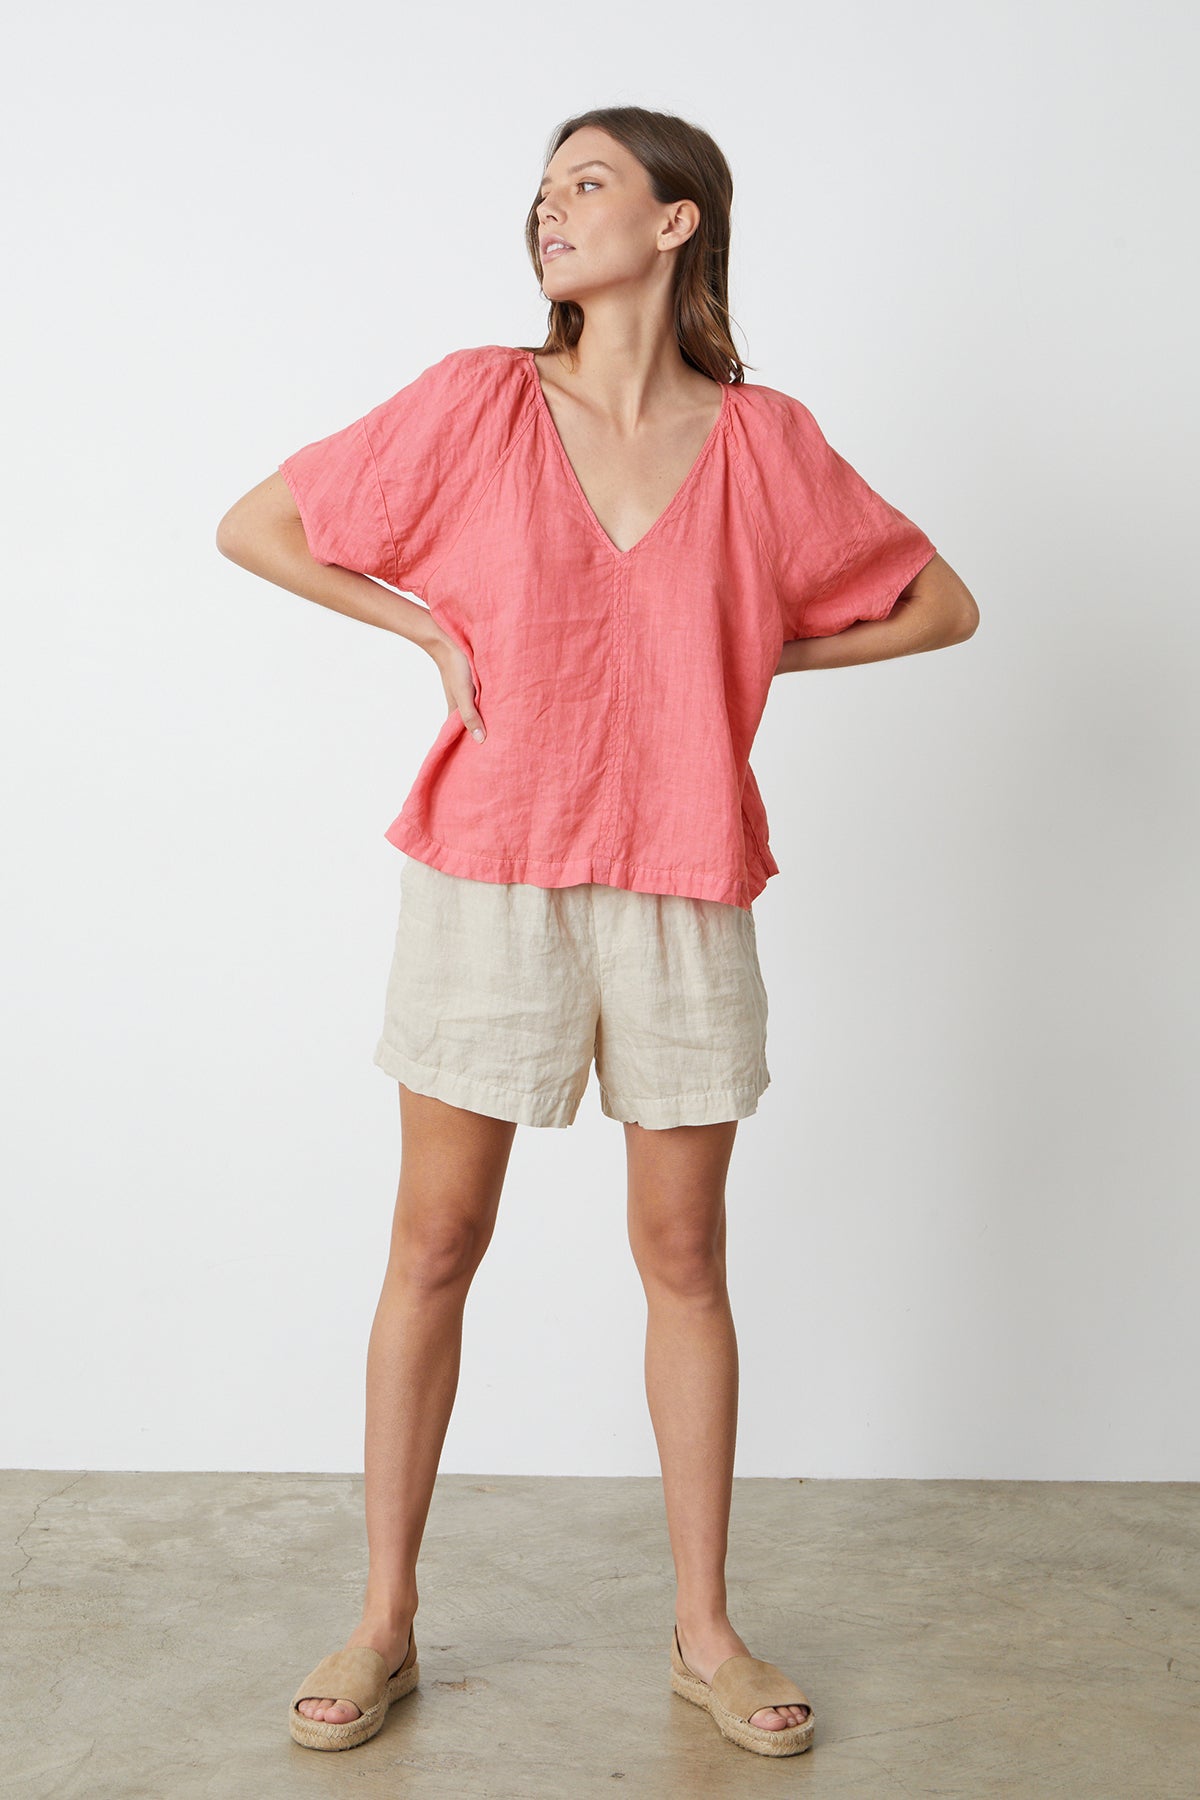 A woman standing in front of a white wall wearing the CALLIN PUFF SLEEVE LINEN TOP in rosebay by Velvet by Graham & Spencer with Tammy shorts and sandals, full length front-26262345580737